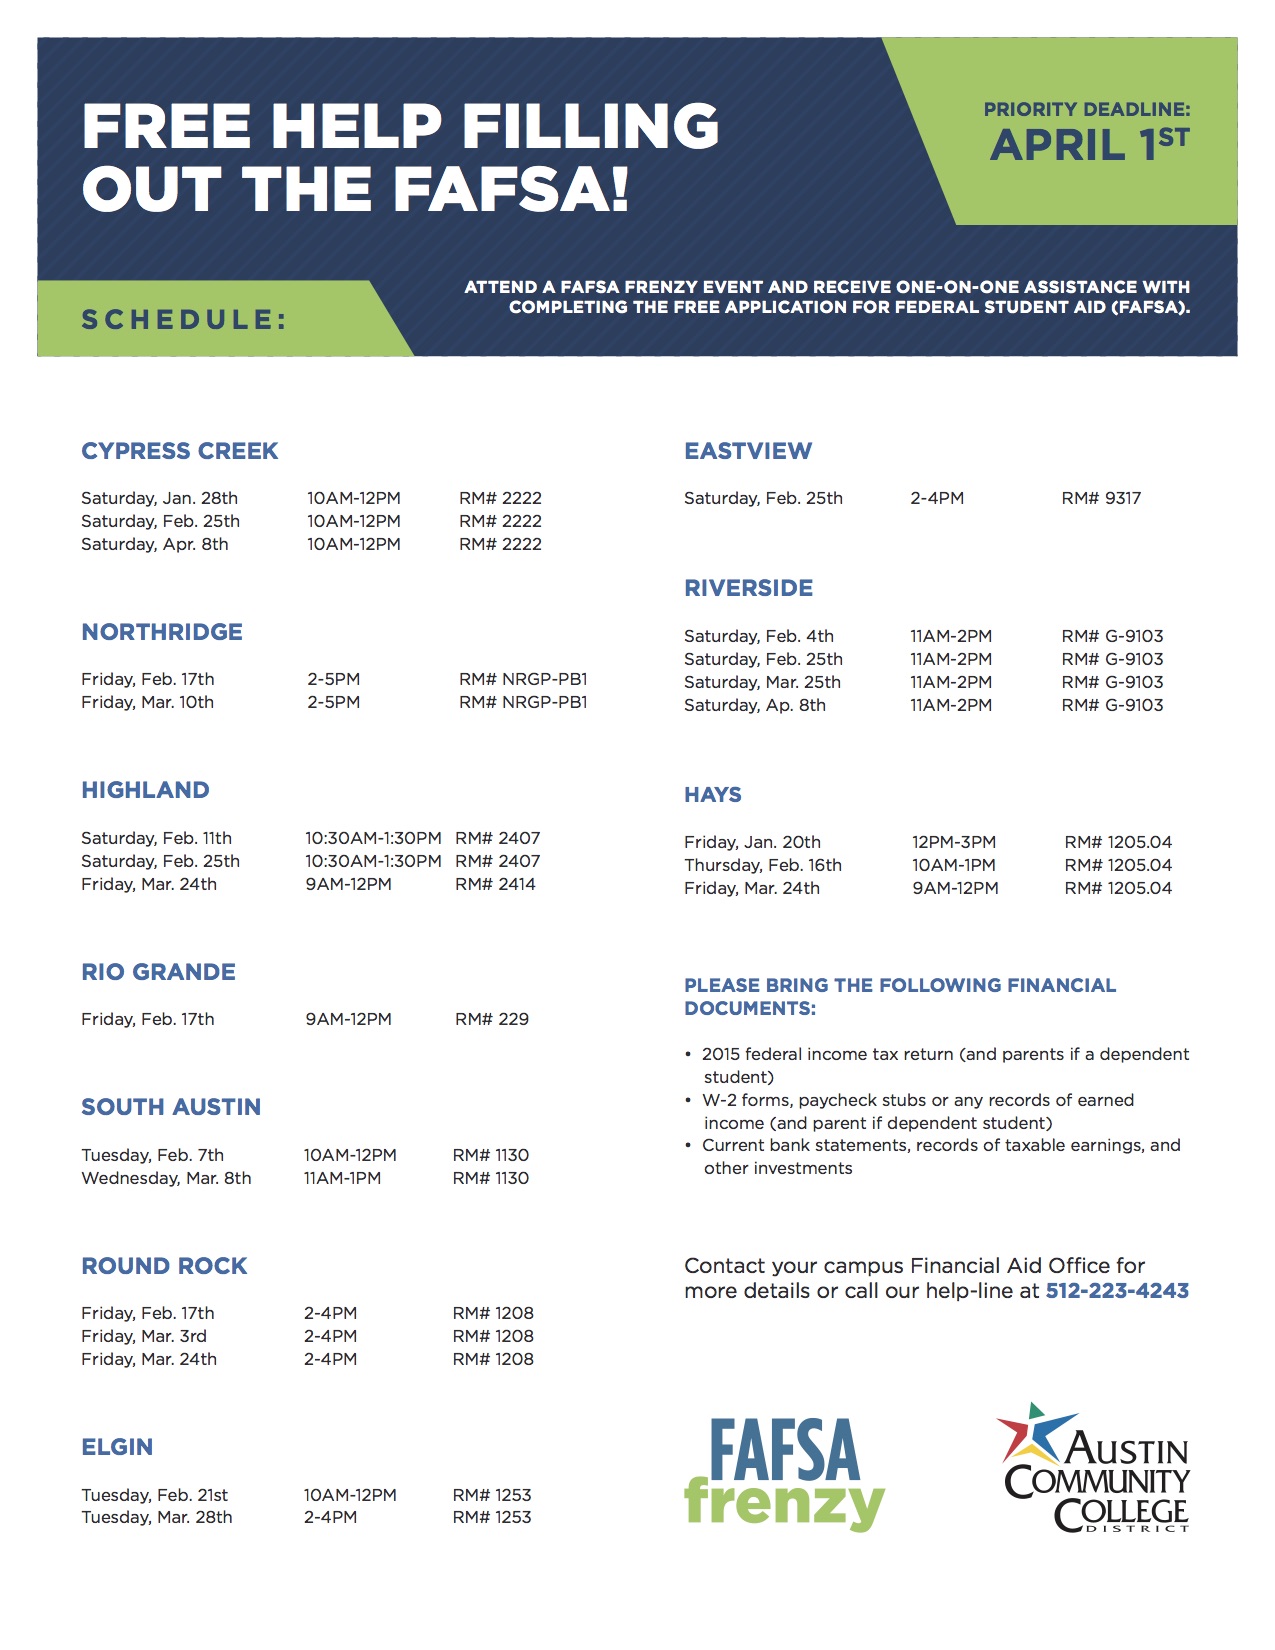 acc financial aid specialists offer free fafsa help | acc newsroom